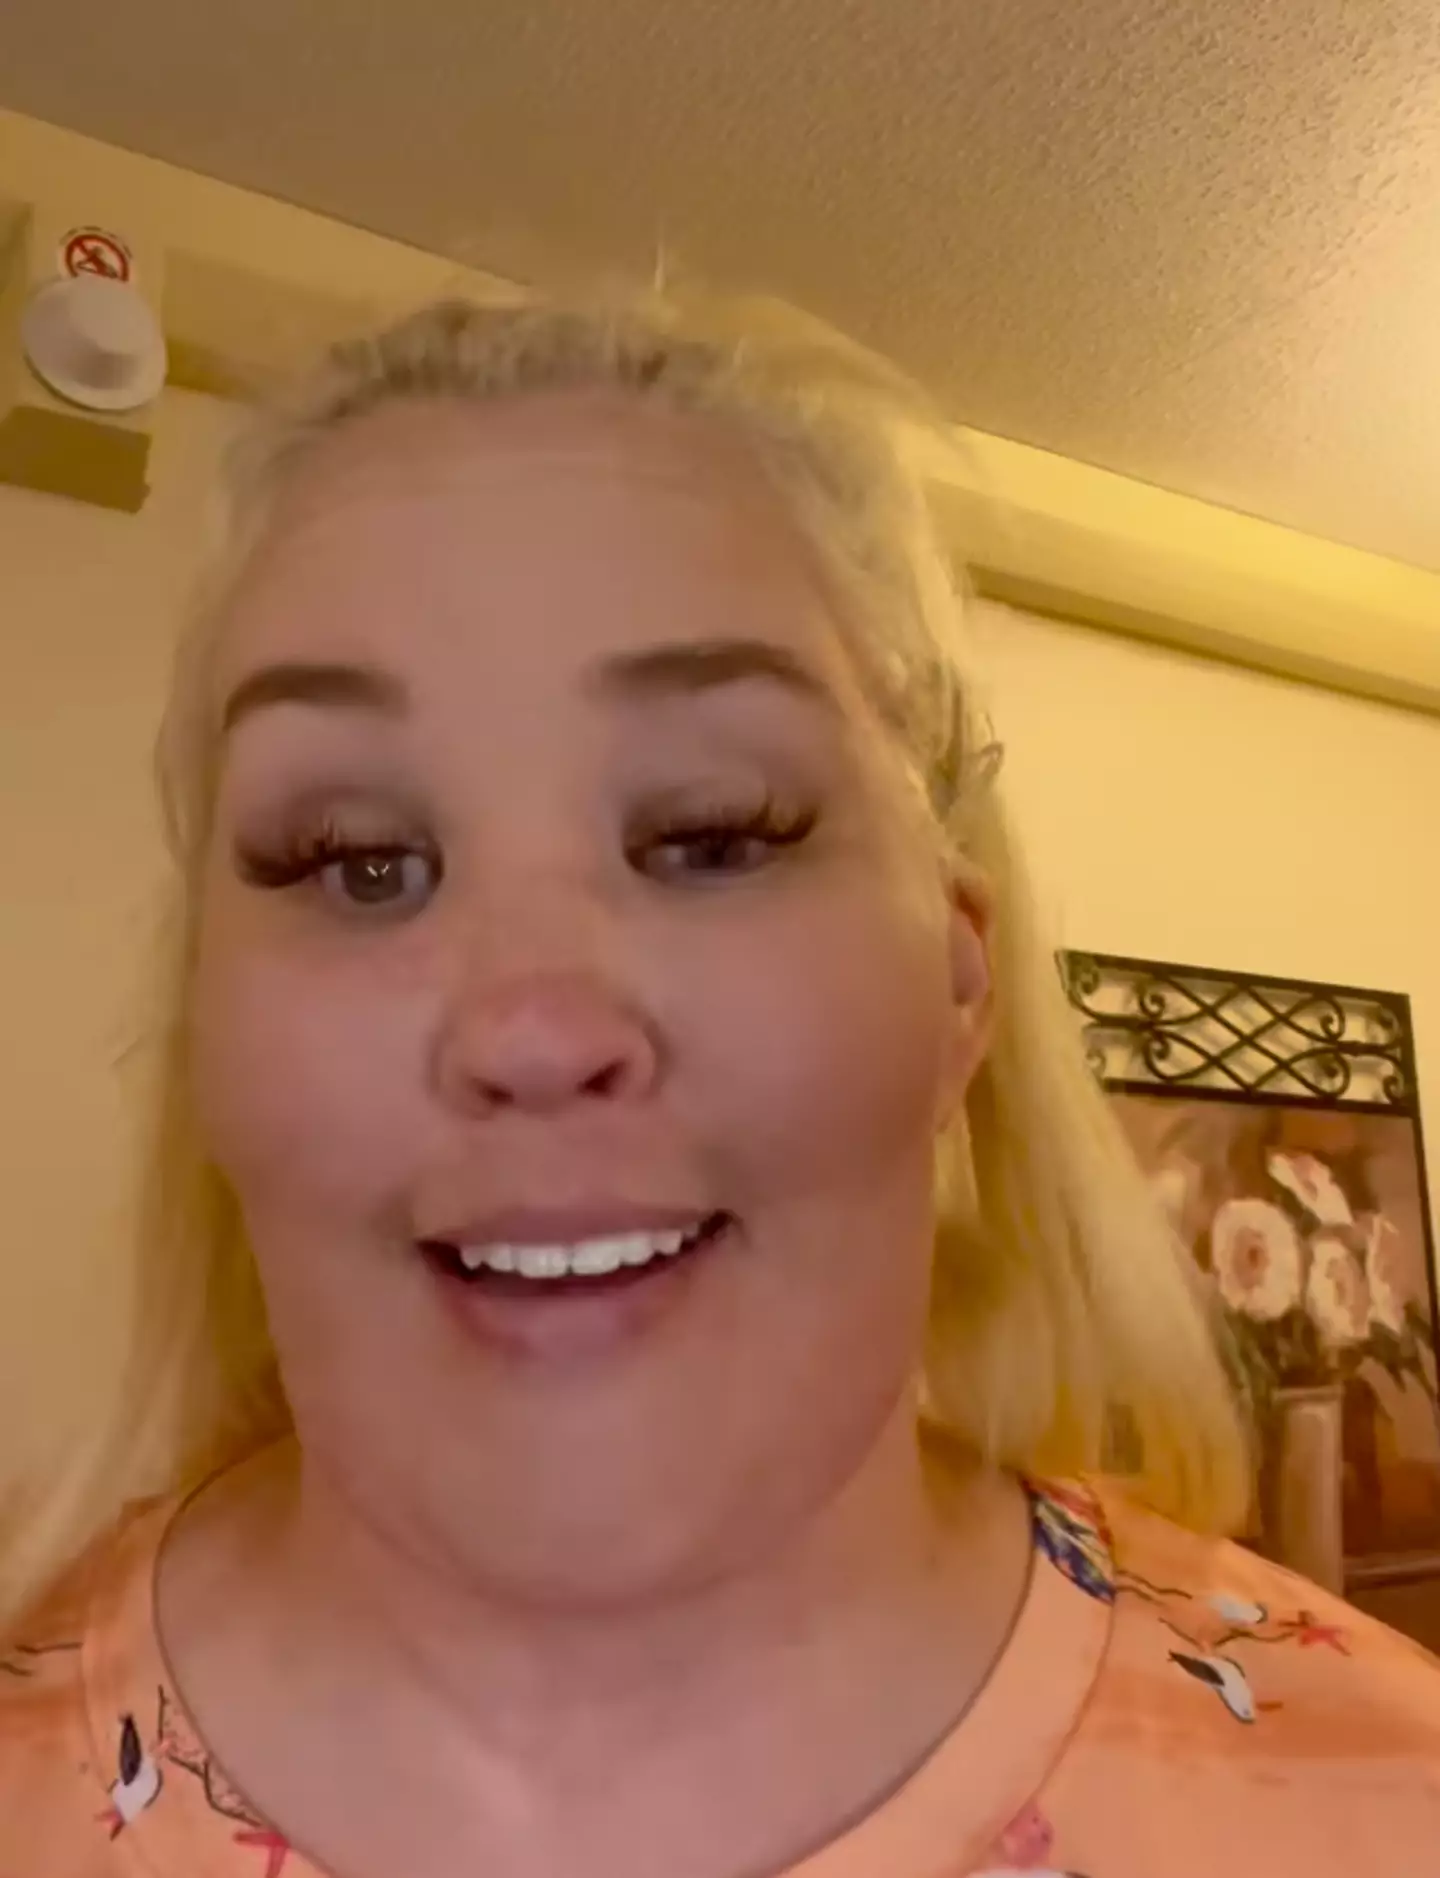 Mama June said her daughter is 'doing pretty good'.